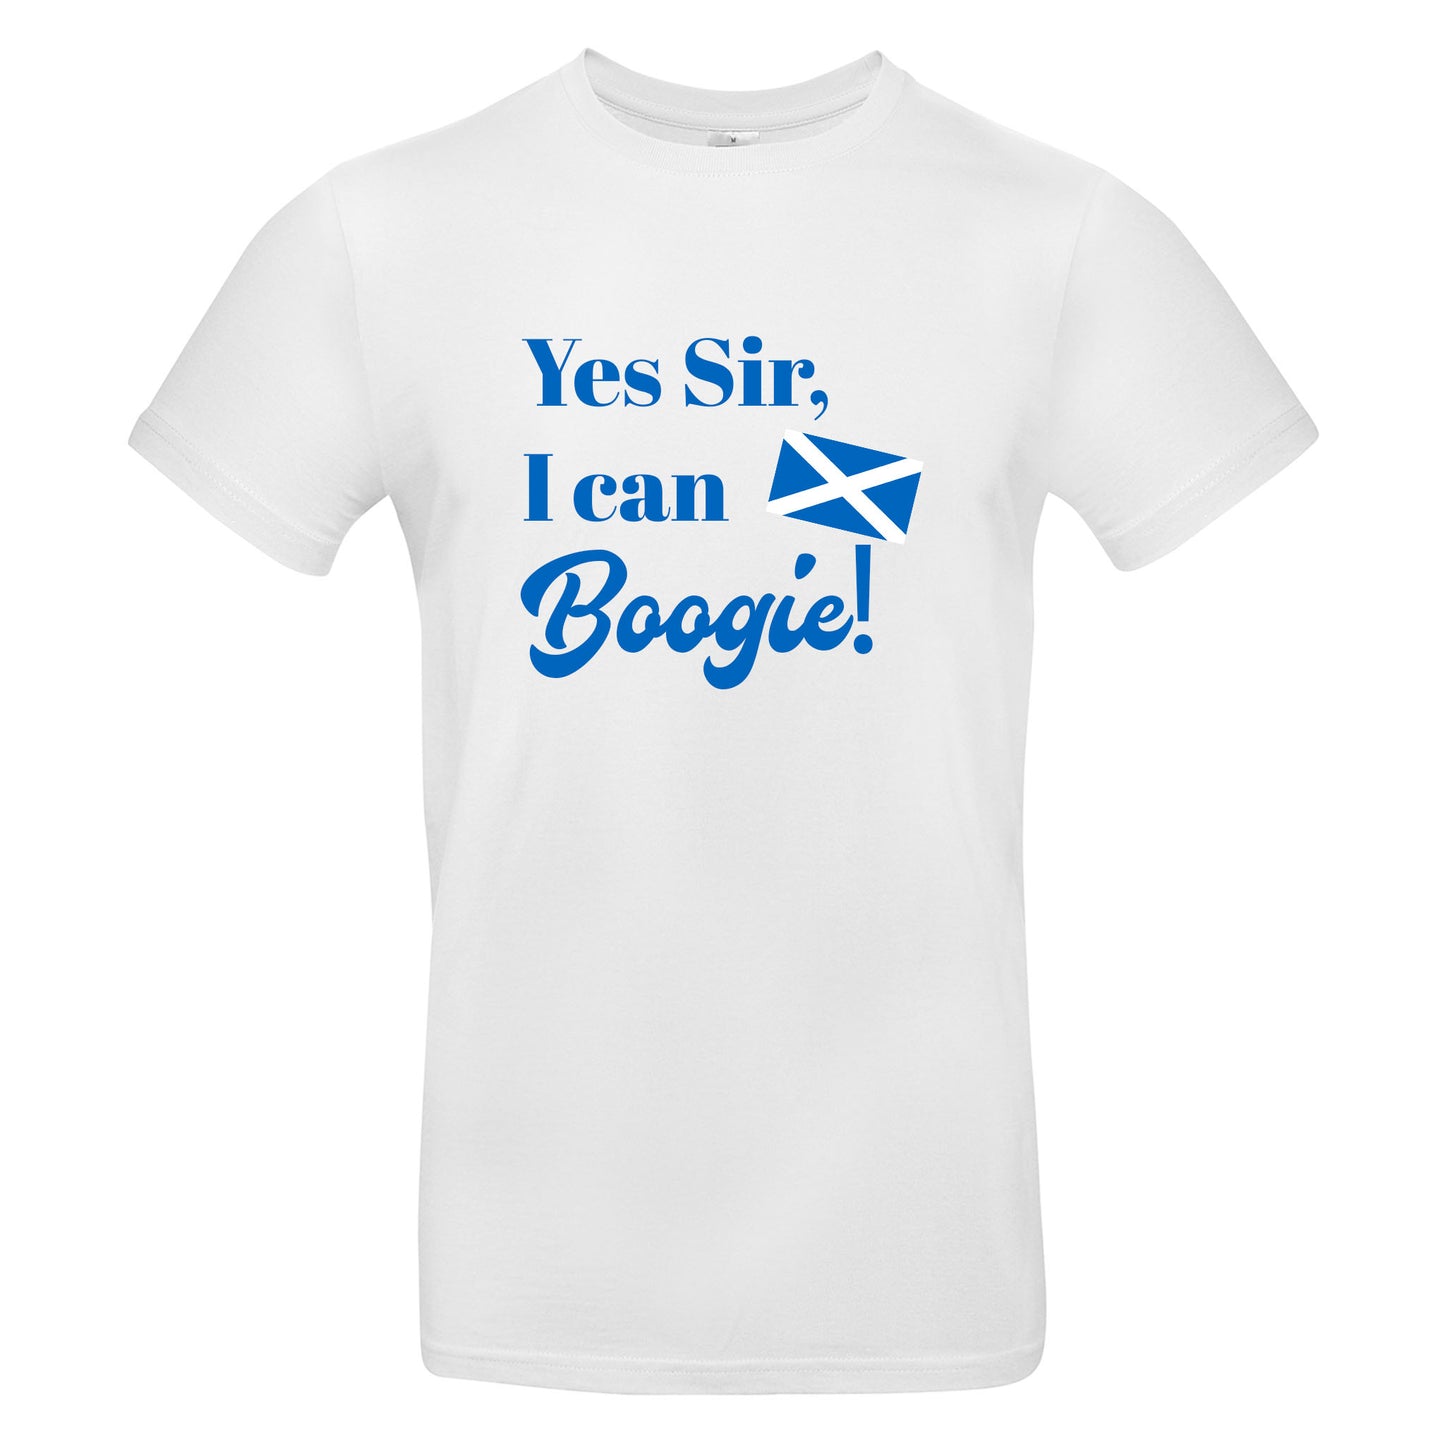 Yes Sir, I can Boogie Scotland - T-Shirt ADULT